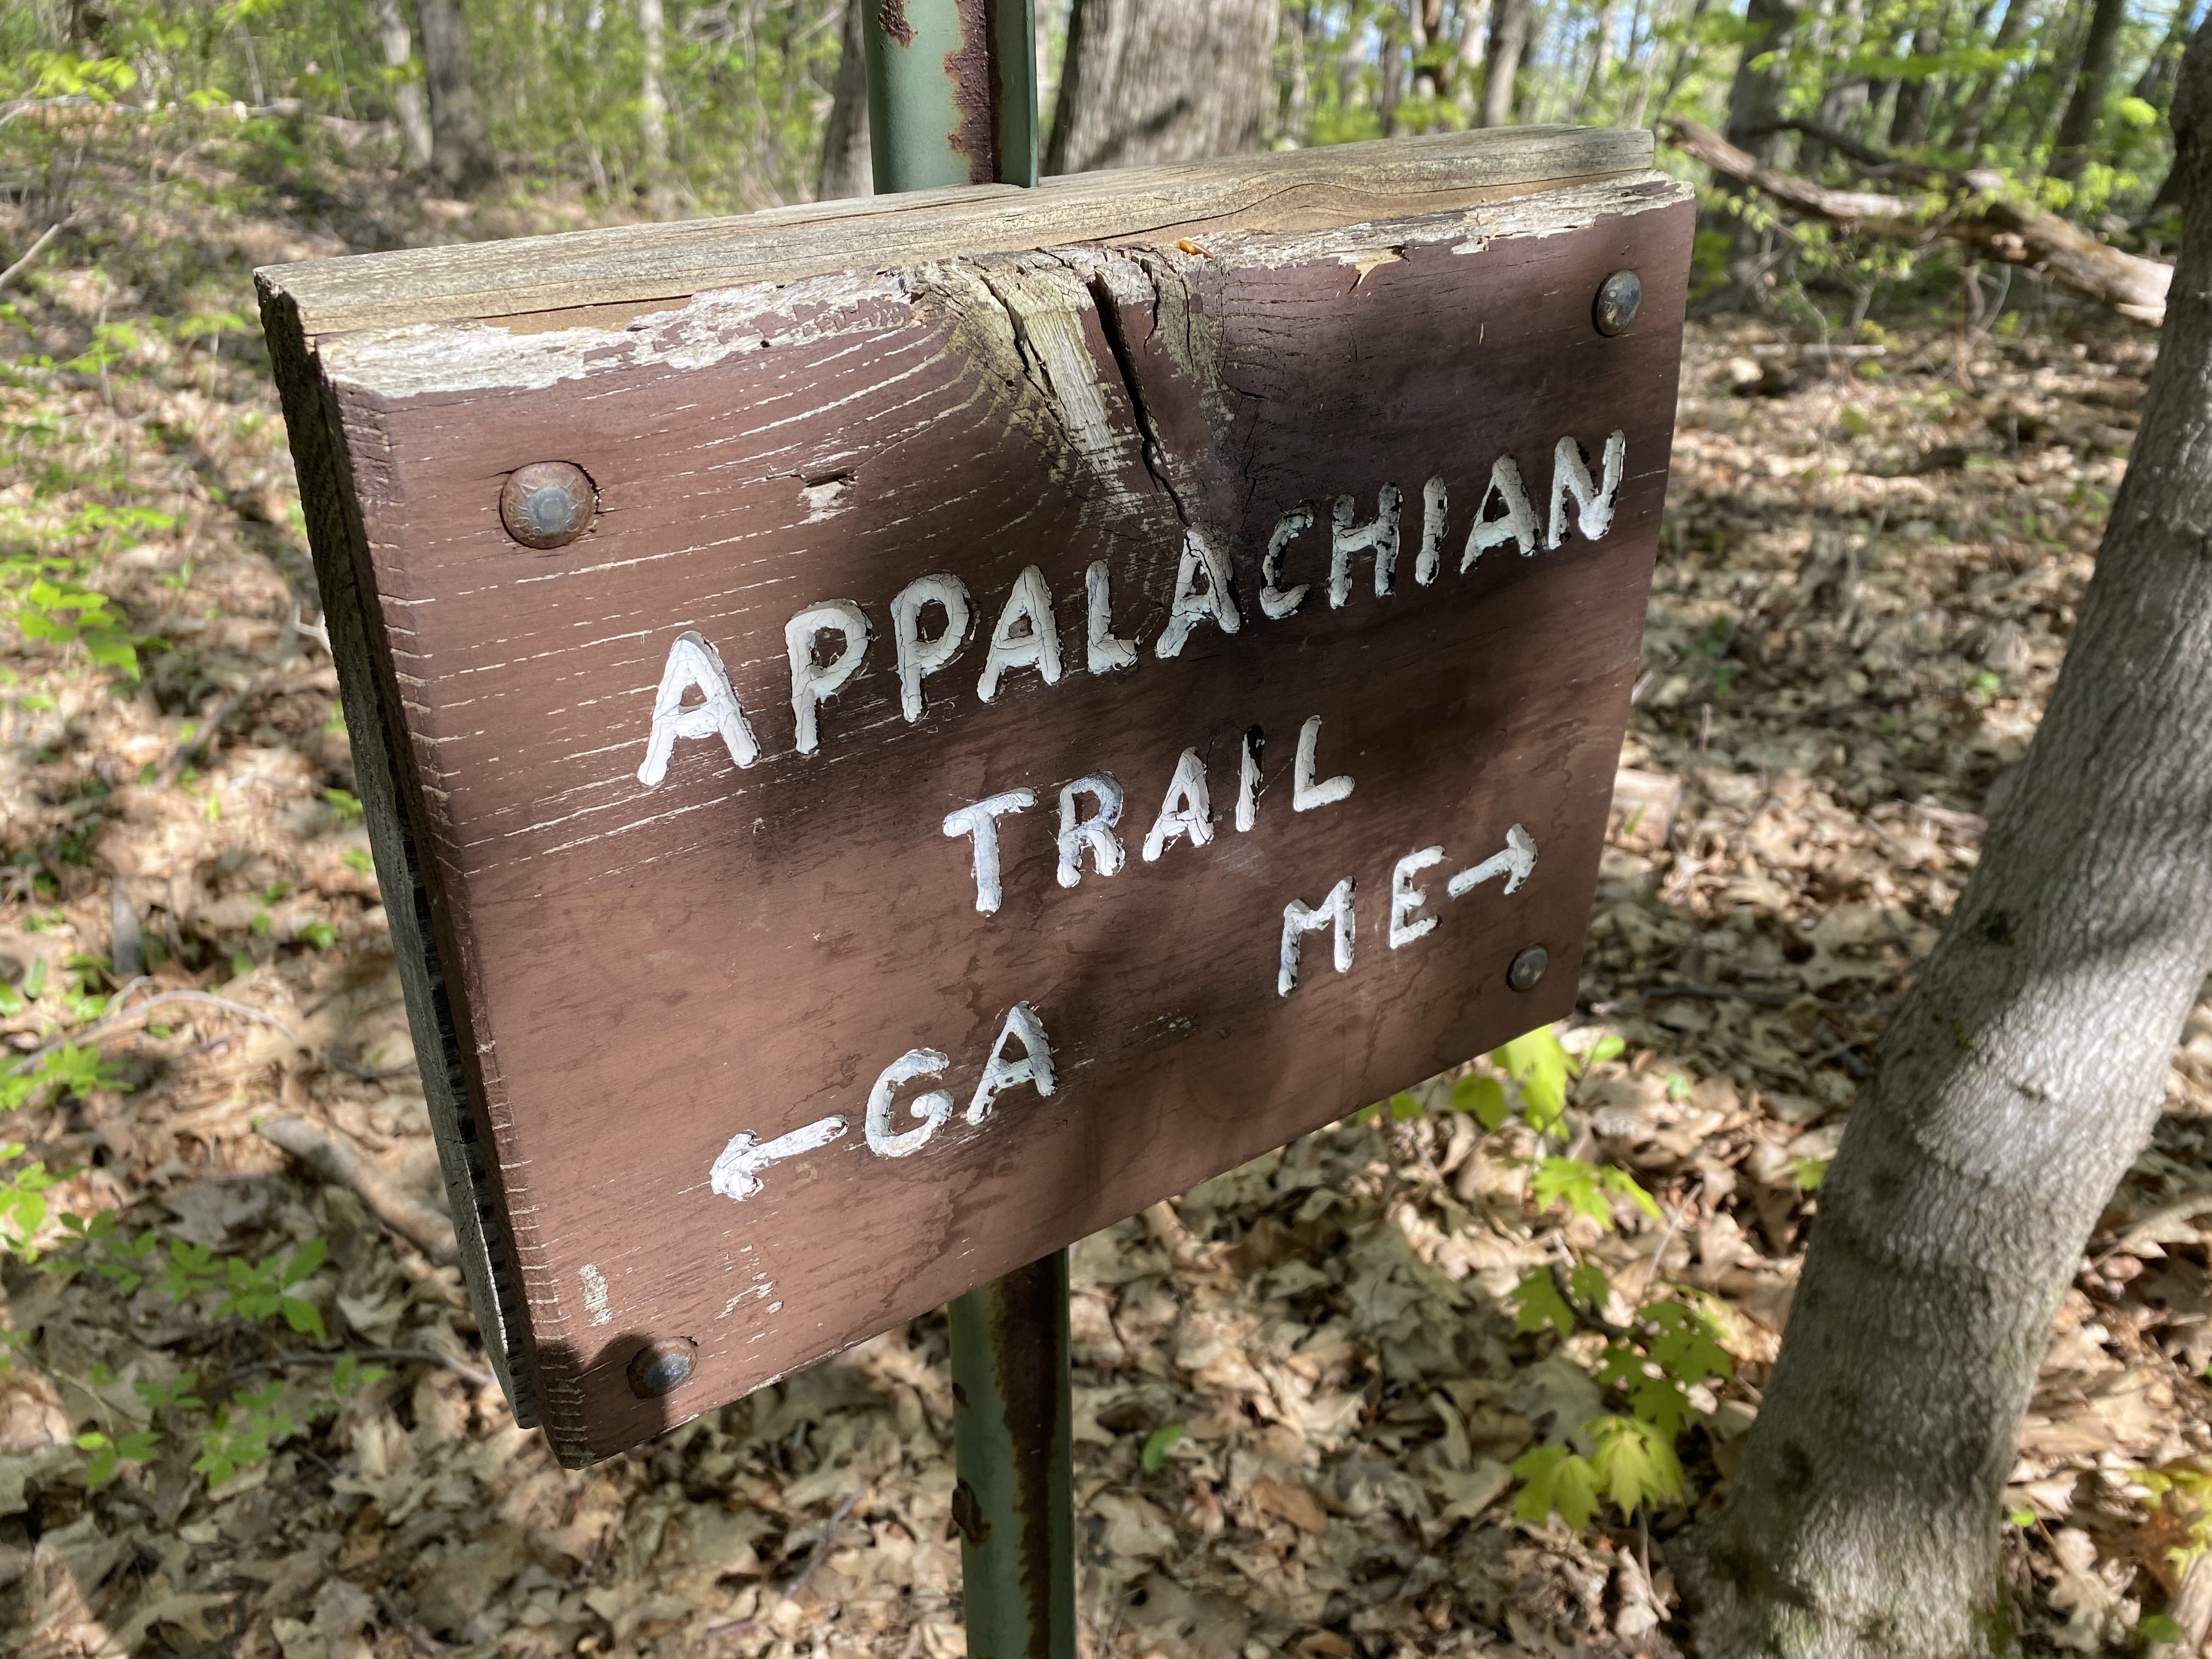 Getting Started On the Massachusetts Appalachian Trail